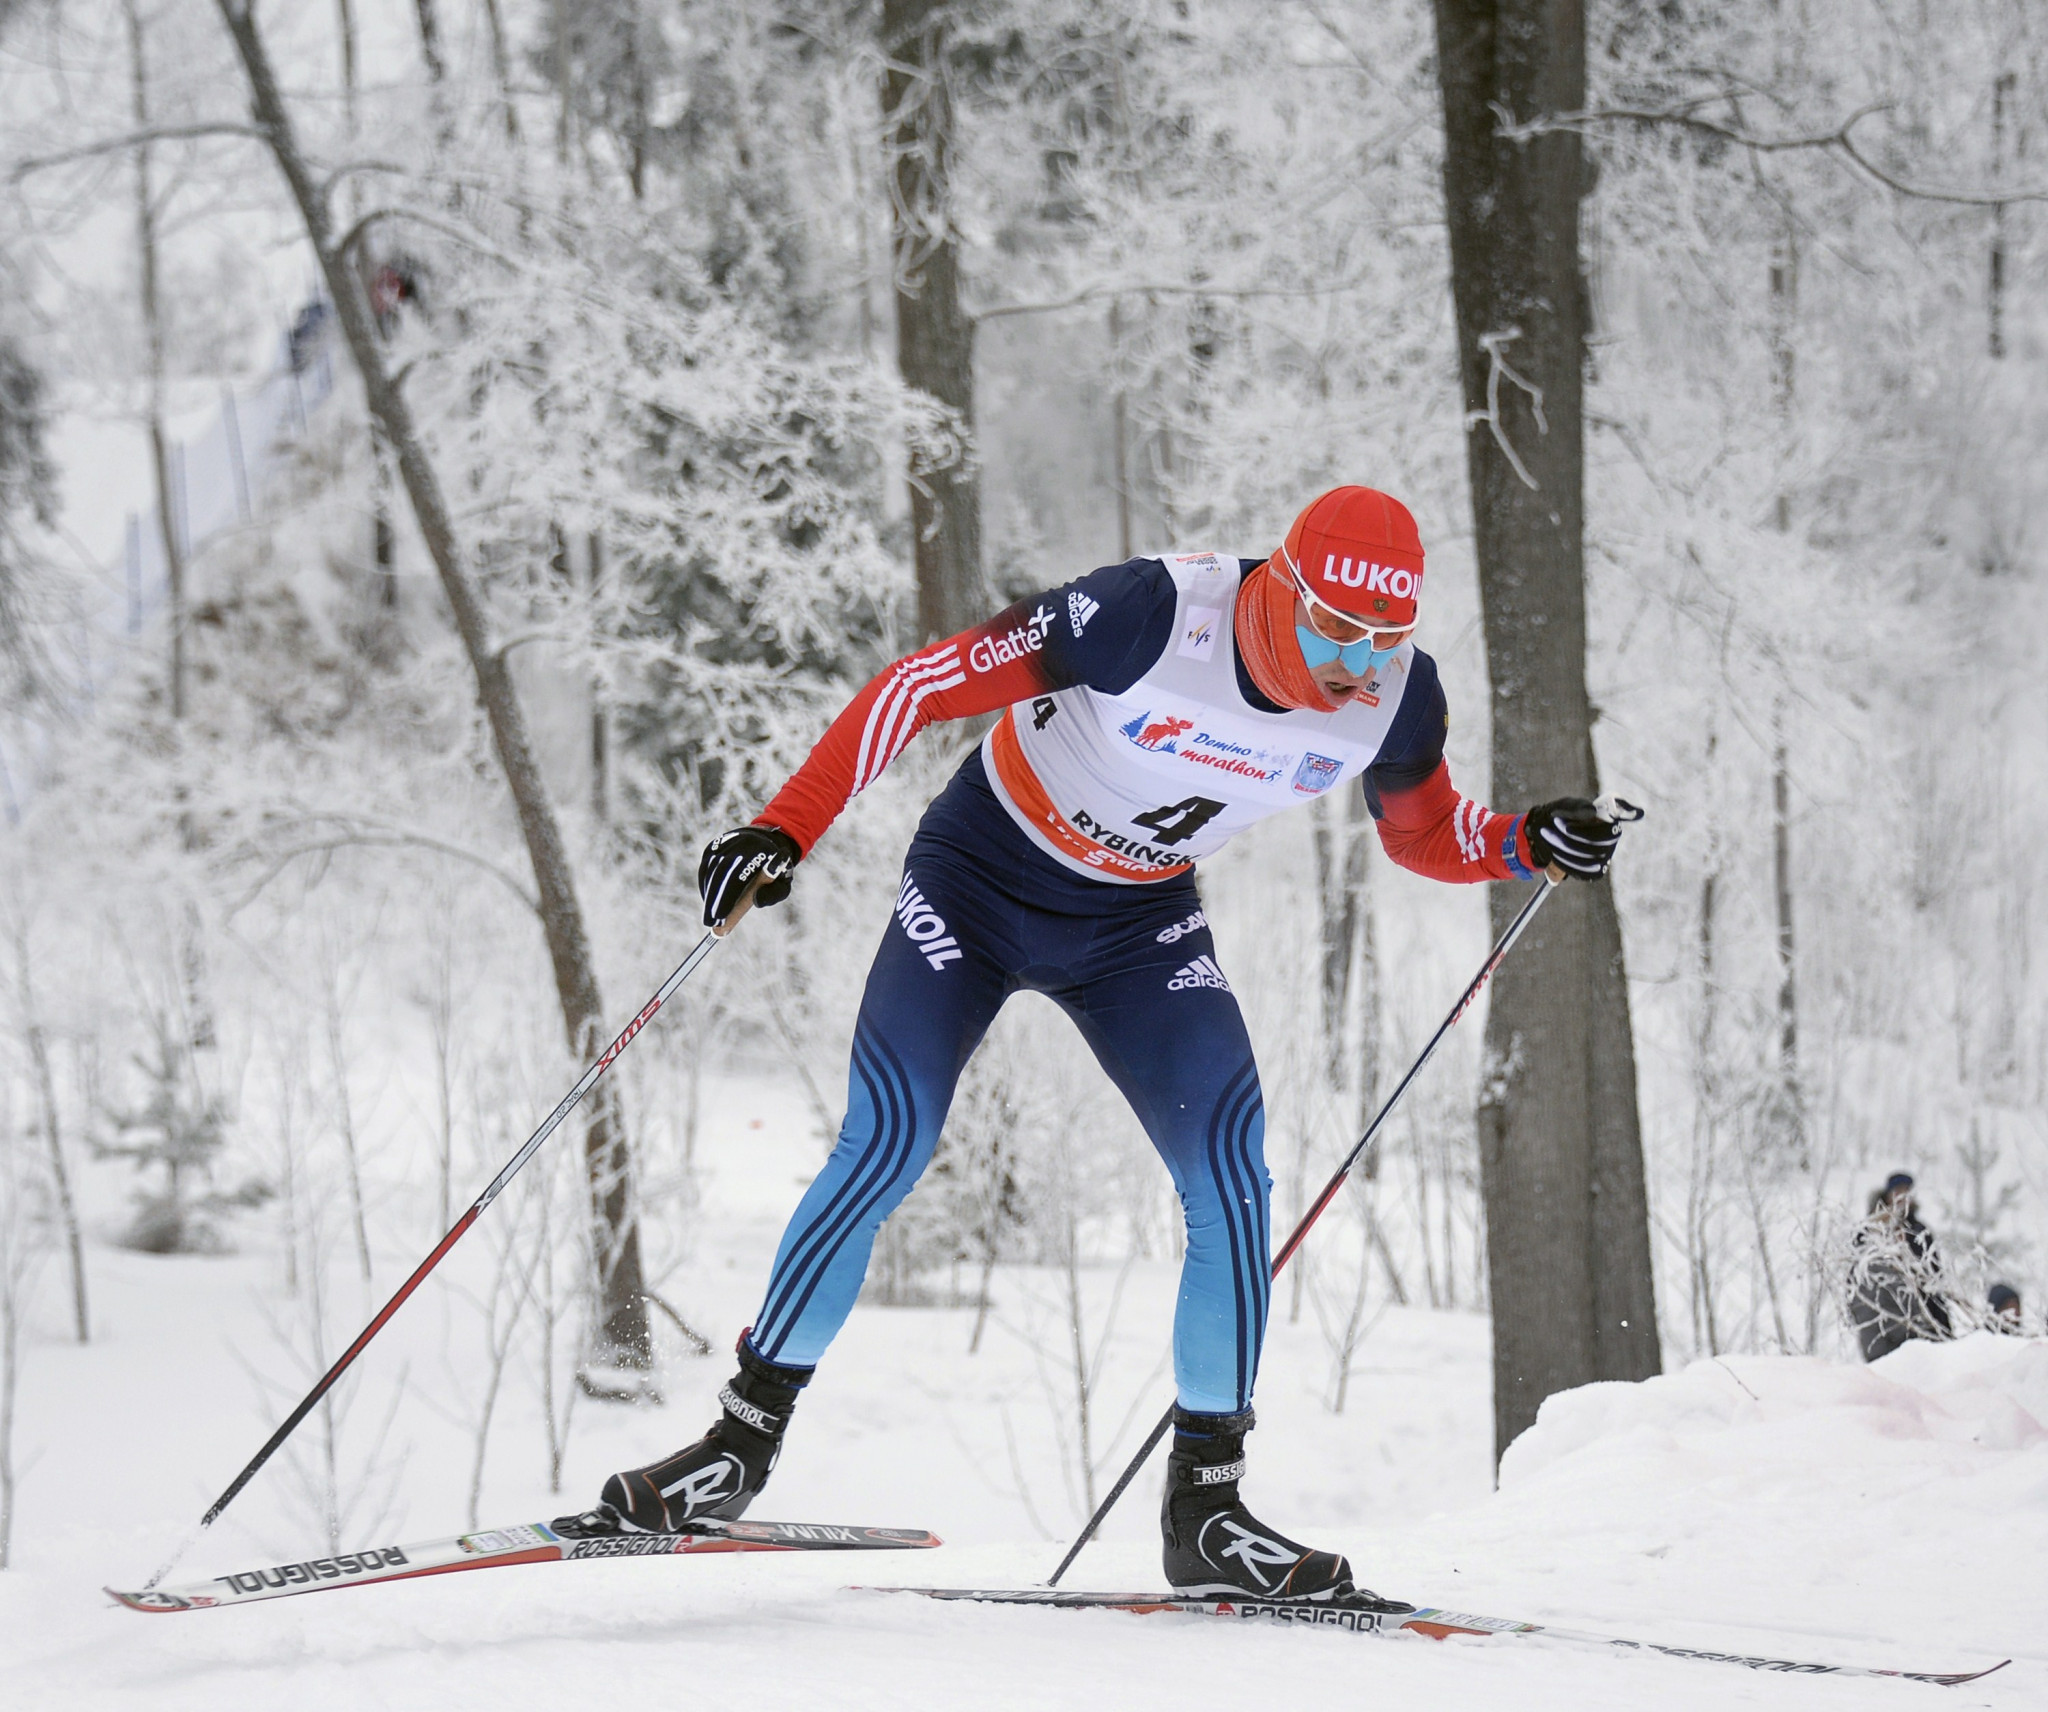 FIS clears cross-country skiers sanctioned by IOC to compete in season-opening World Cup